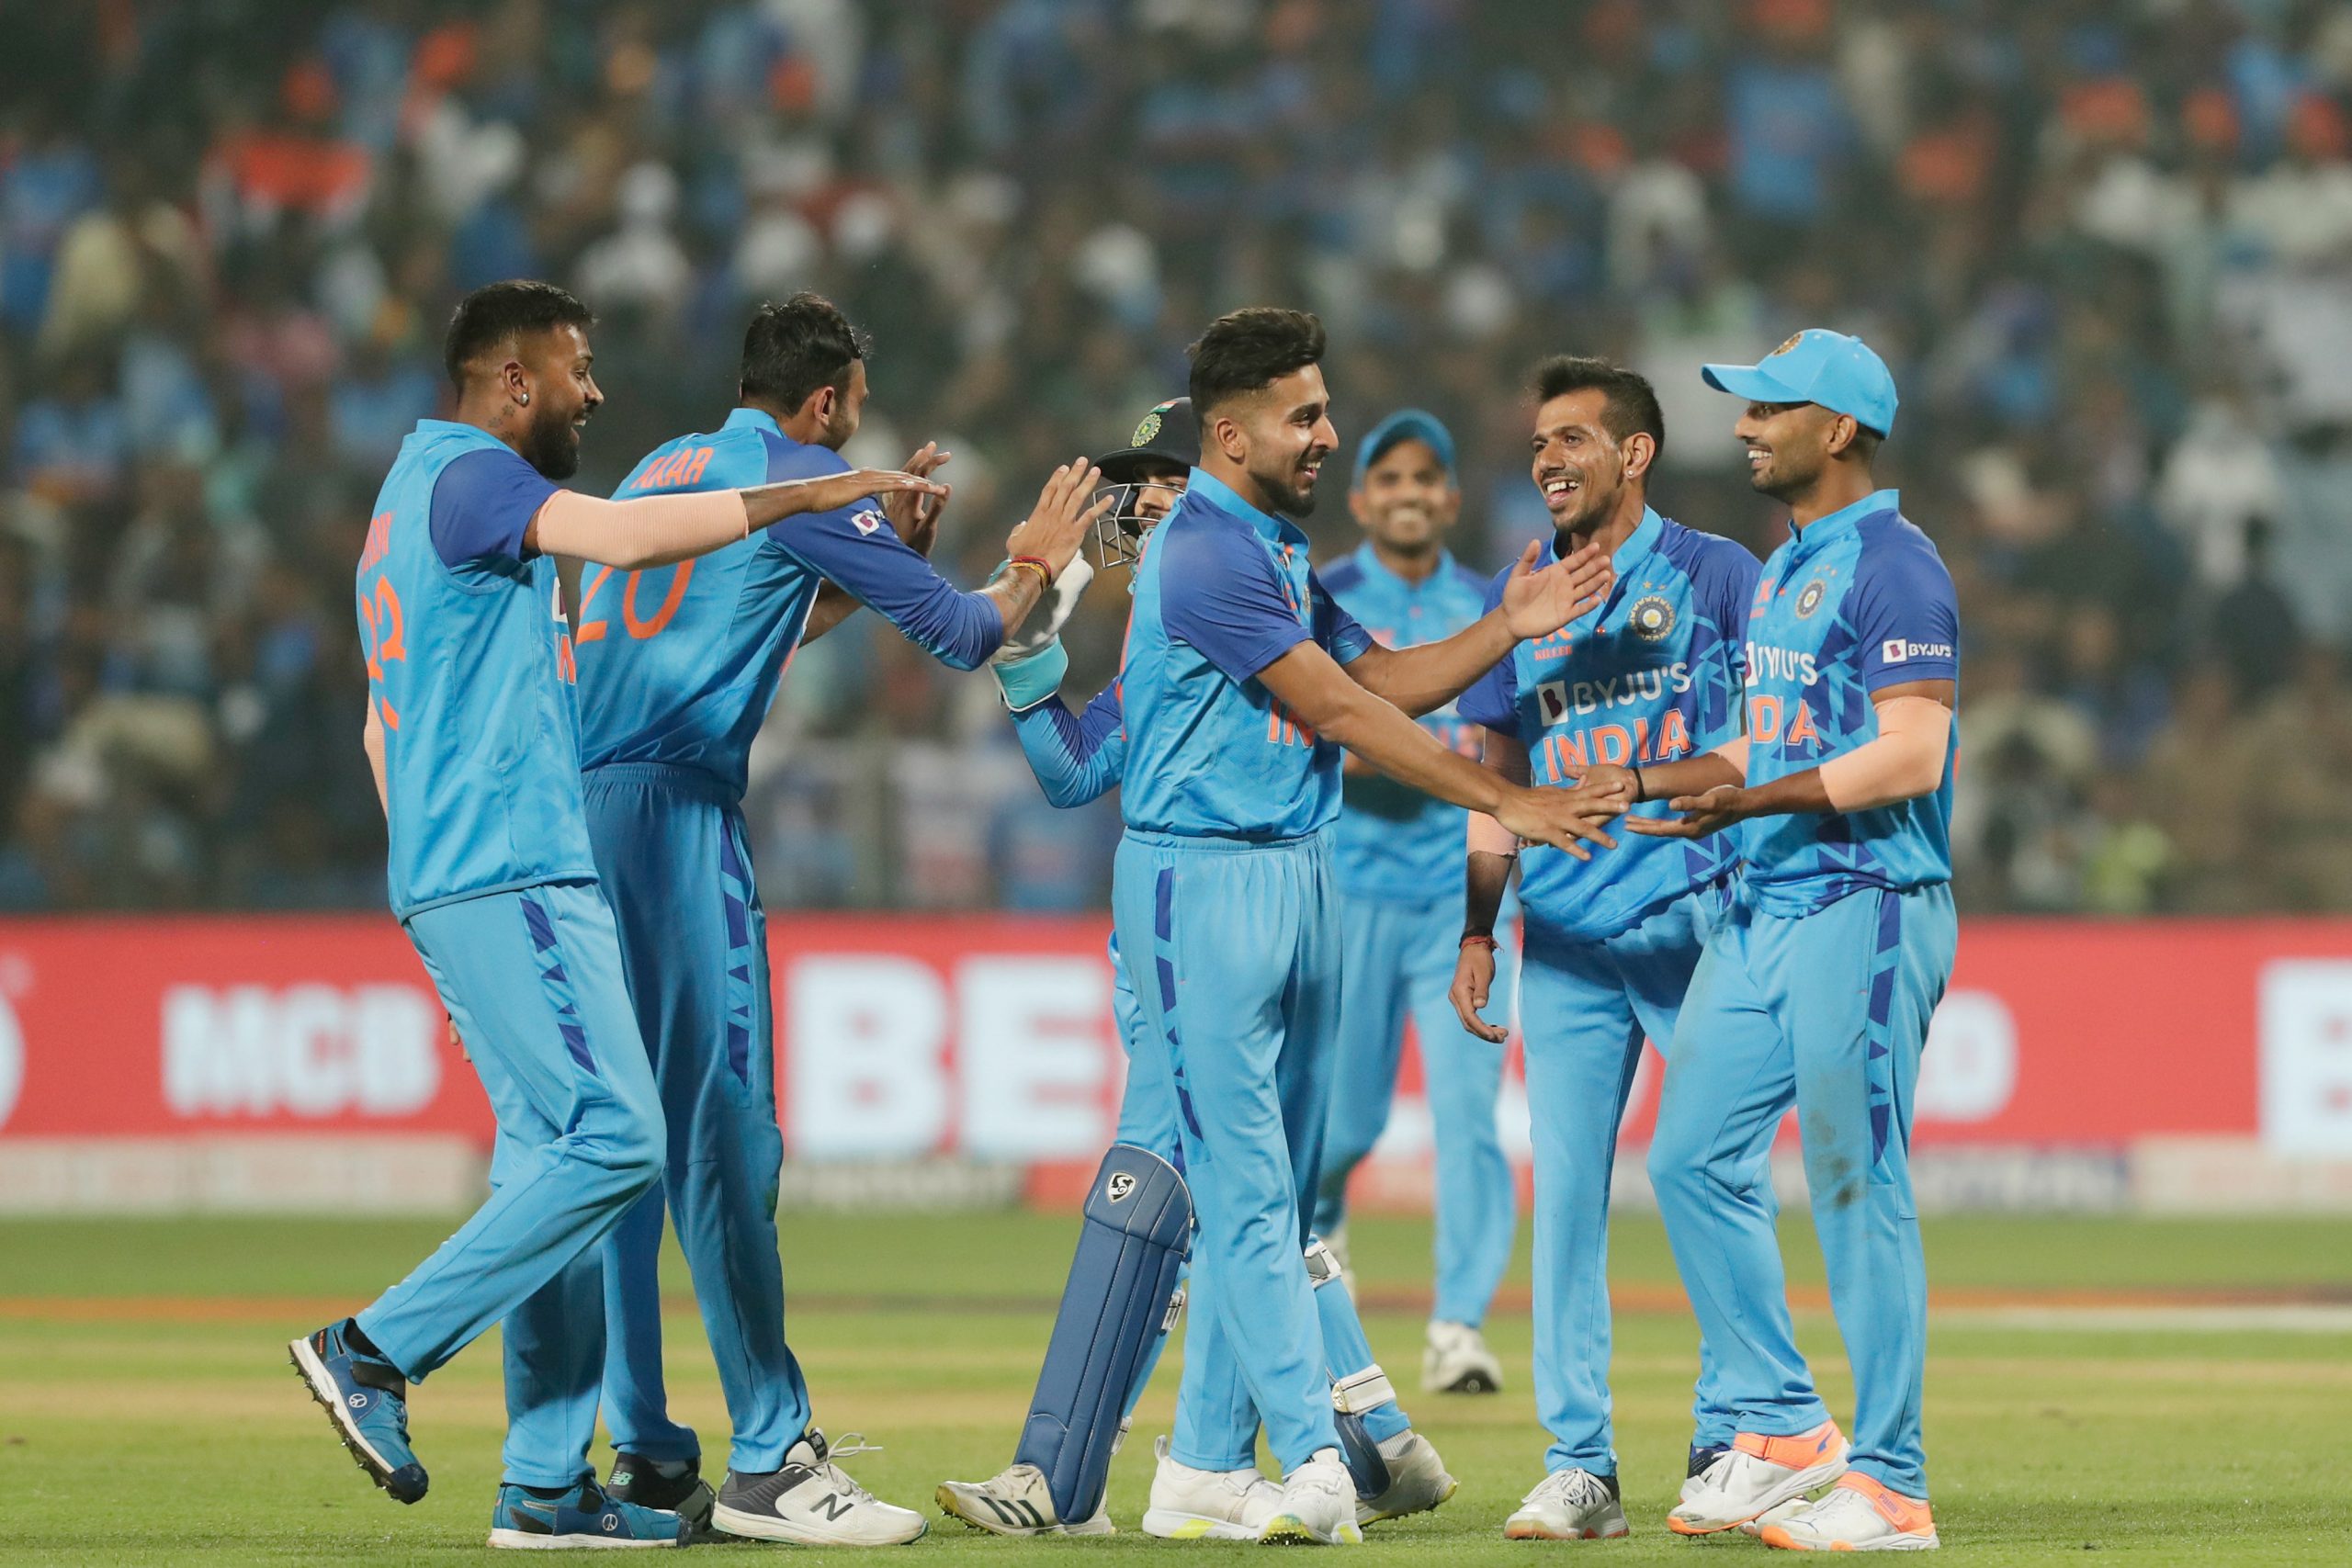 3 Takeaways For Team India From The T20I Series Against Sri Lanka